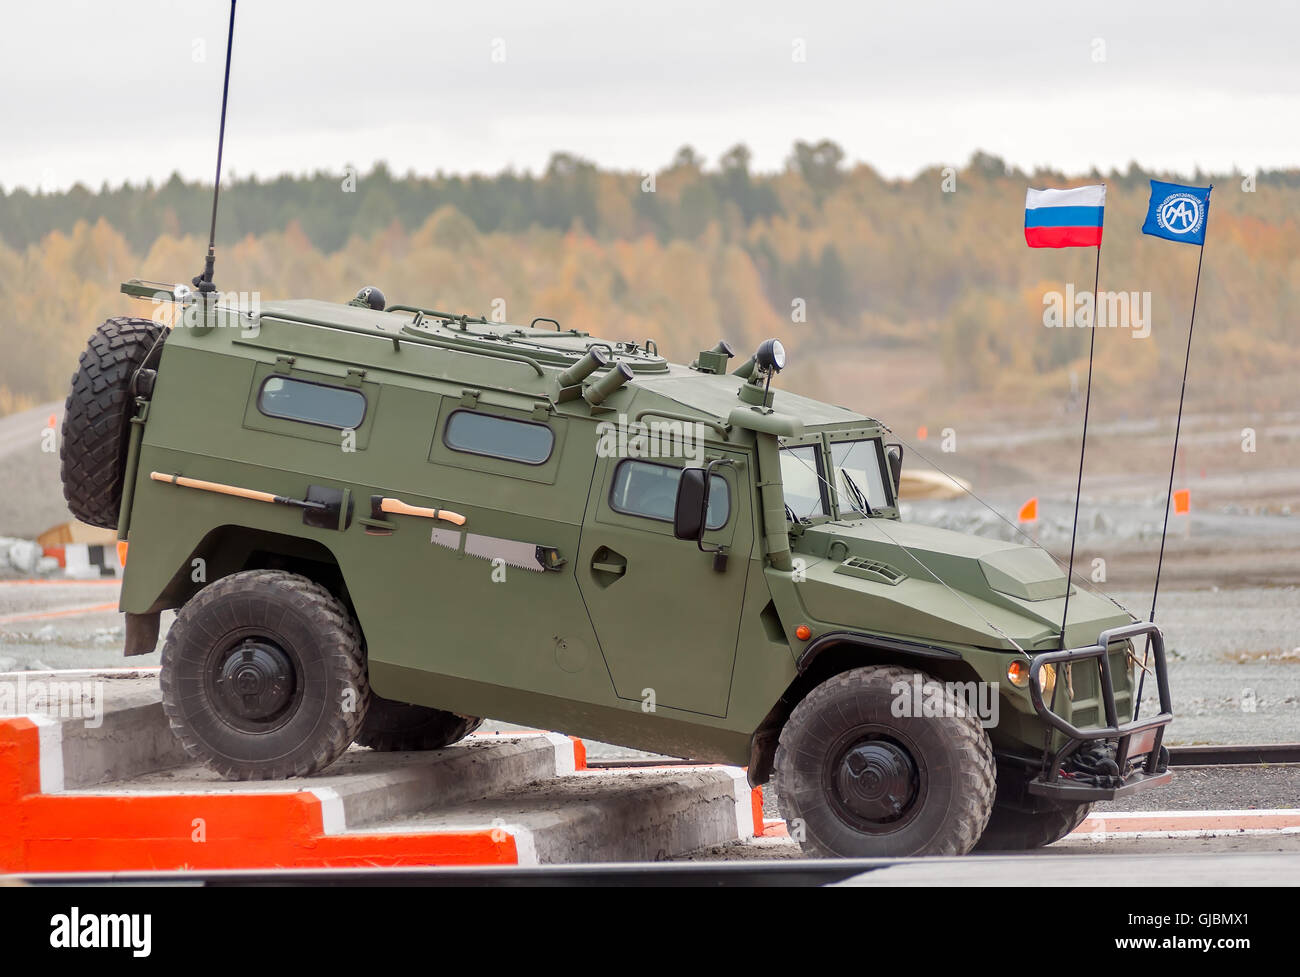 VPK-233115 Tigr-M armored vehicle (Russia) Stock Photo